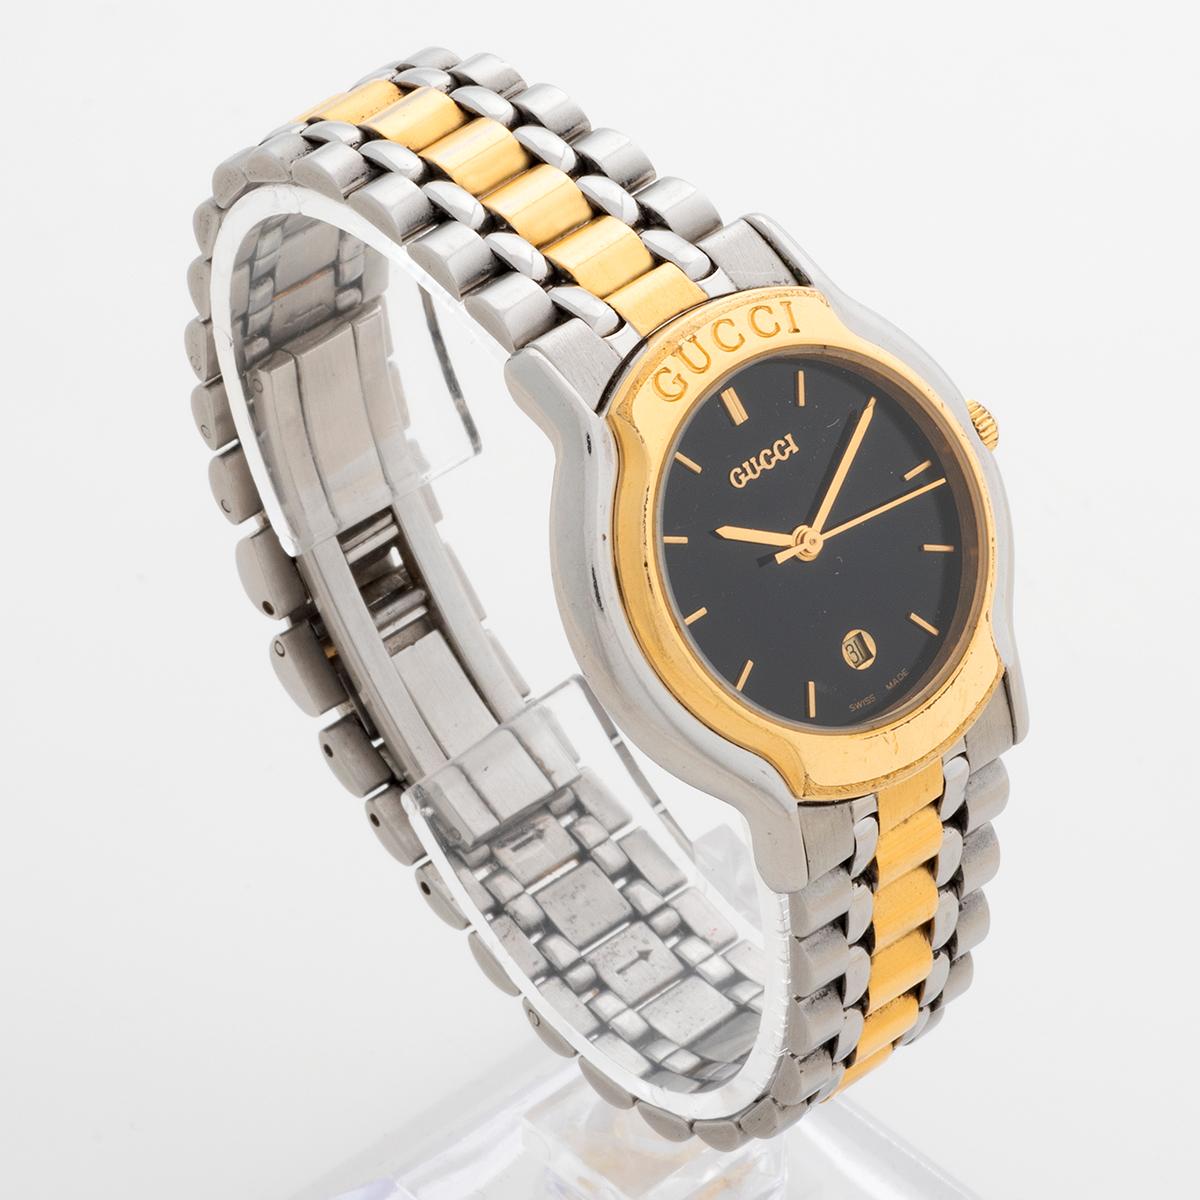 Our neo vintage Gucci 8000L features a stainless steel and gold plated case (28 x 34mm) and bracelet with black dial. A larger than average ladies watch when new, this is a relatively unusual reference. An ideal retro watch for any occasion we date